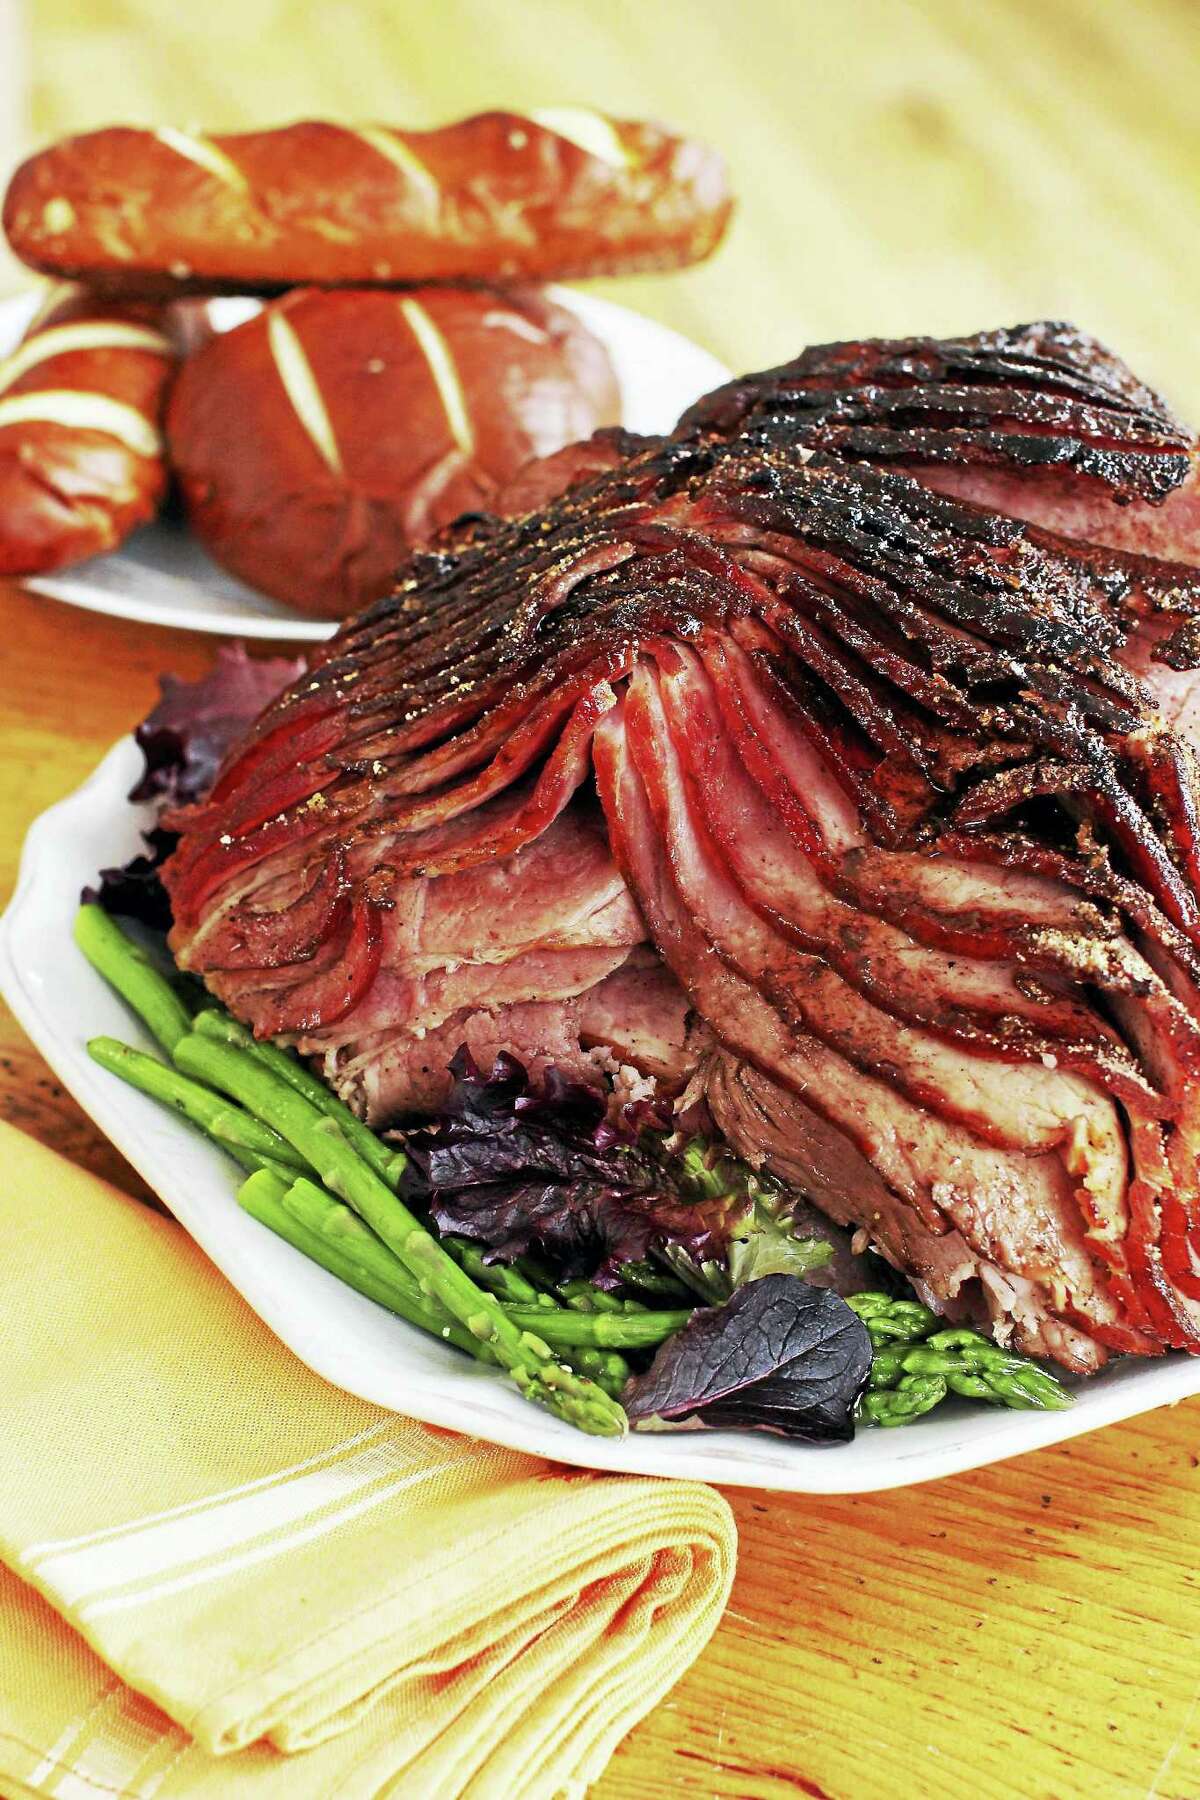 For a better way to glaze your ham, try a dry spice rub that caramelizes into a rich sweet and spicy glaze.